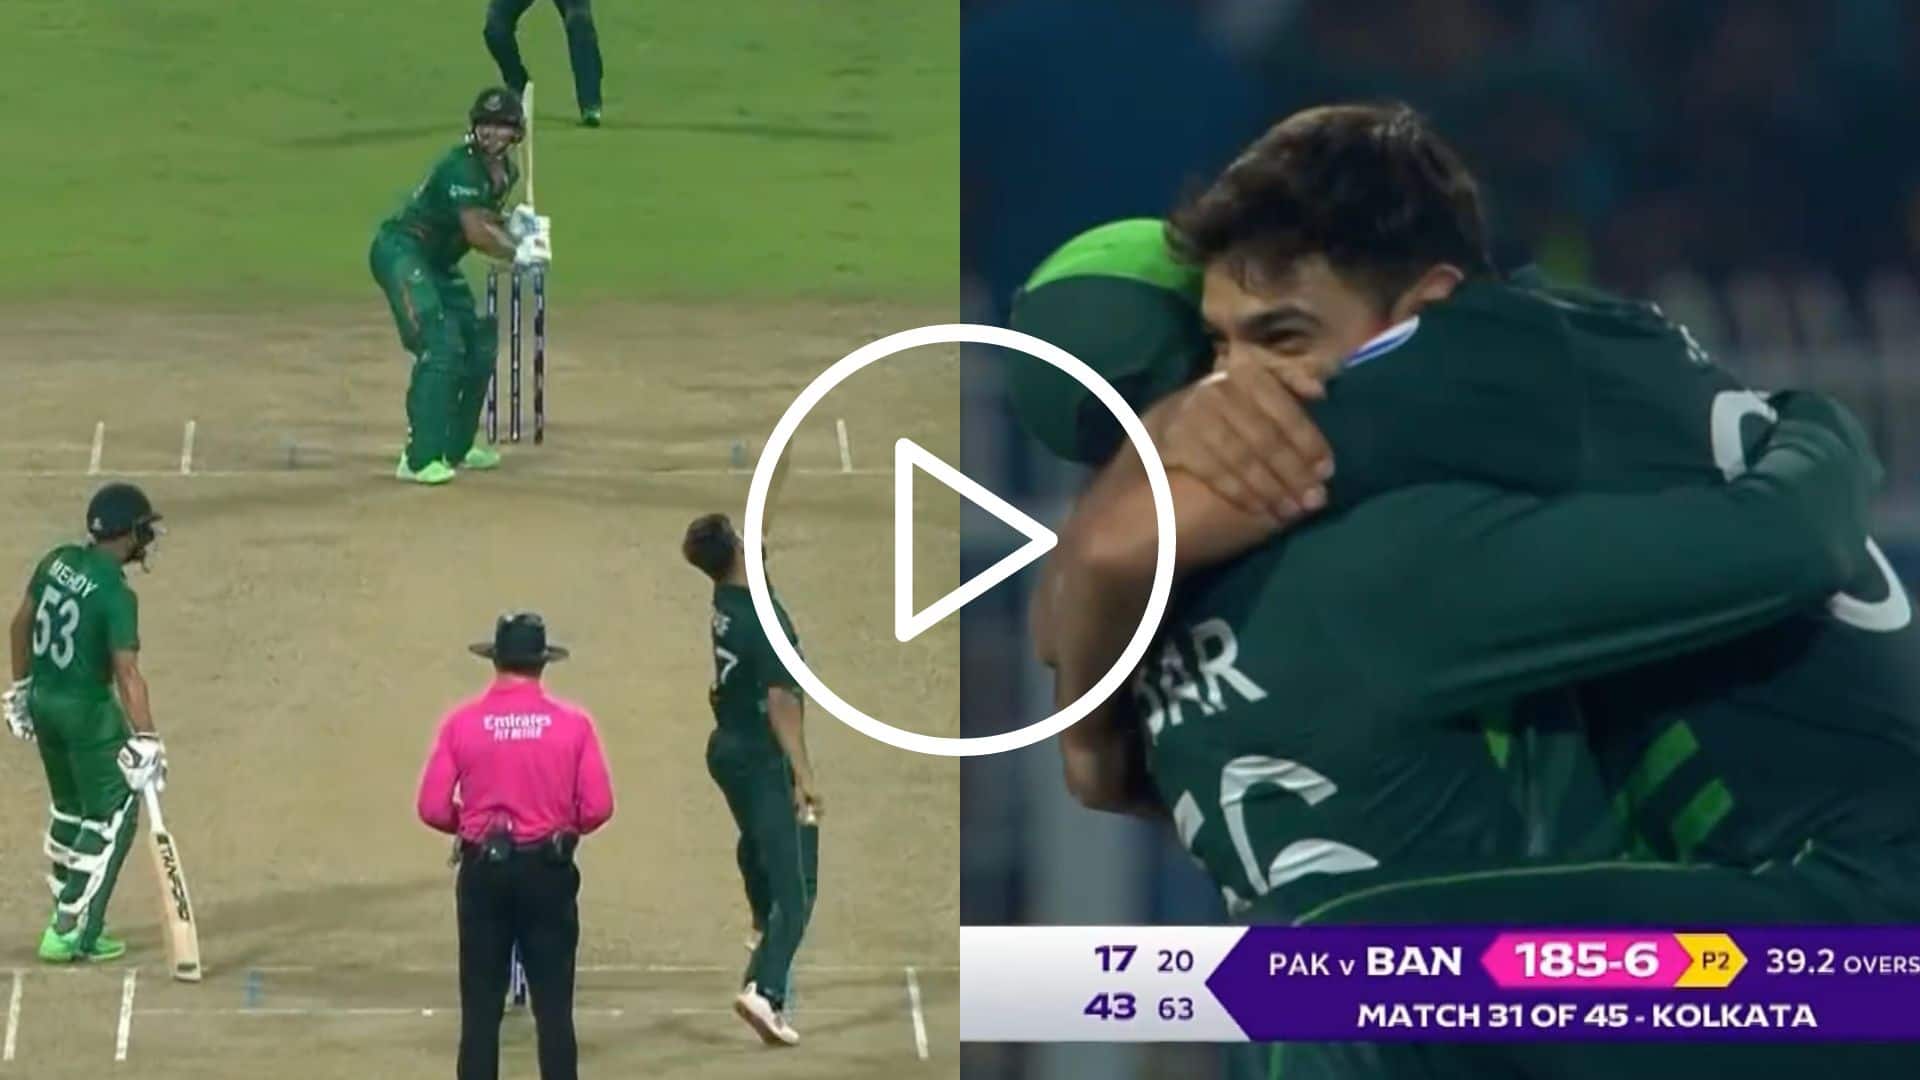 [Watch] Babar Azam 'Lifts' Haris Rauf In His Arms As He Dismisses Shakib With A Killer Bouncer